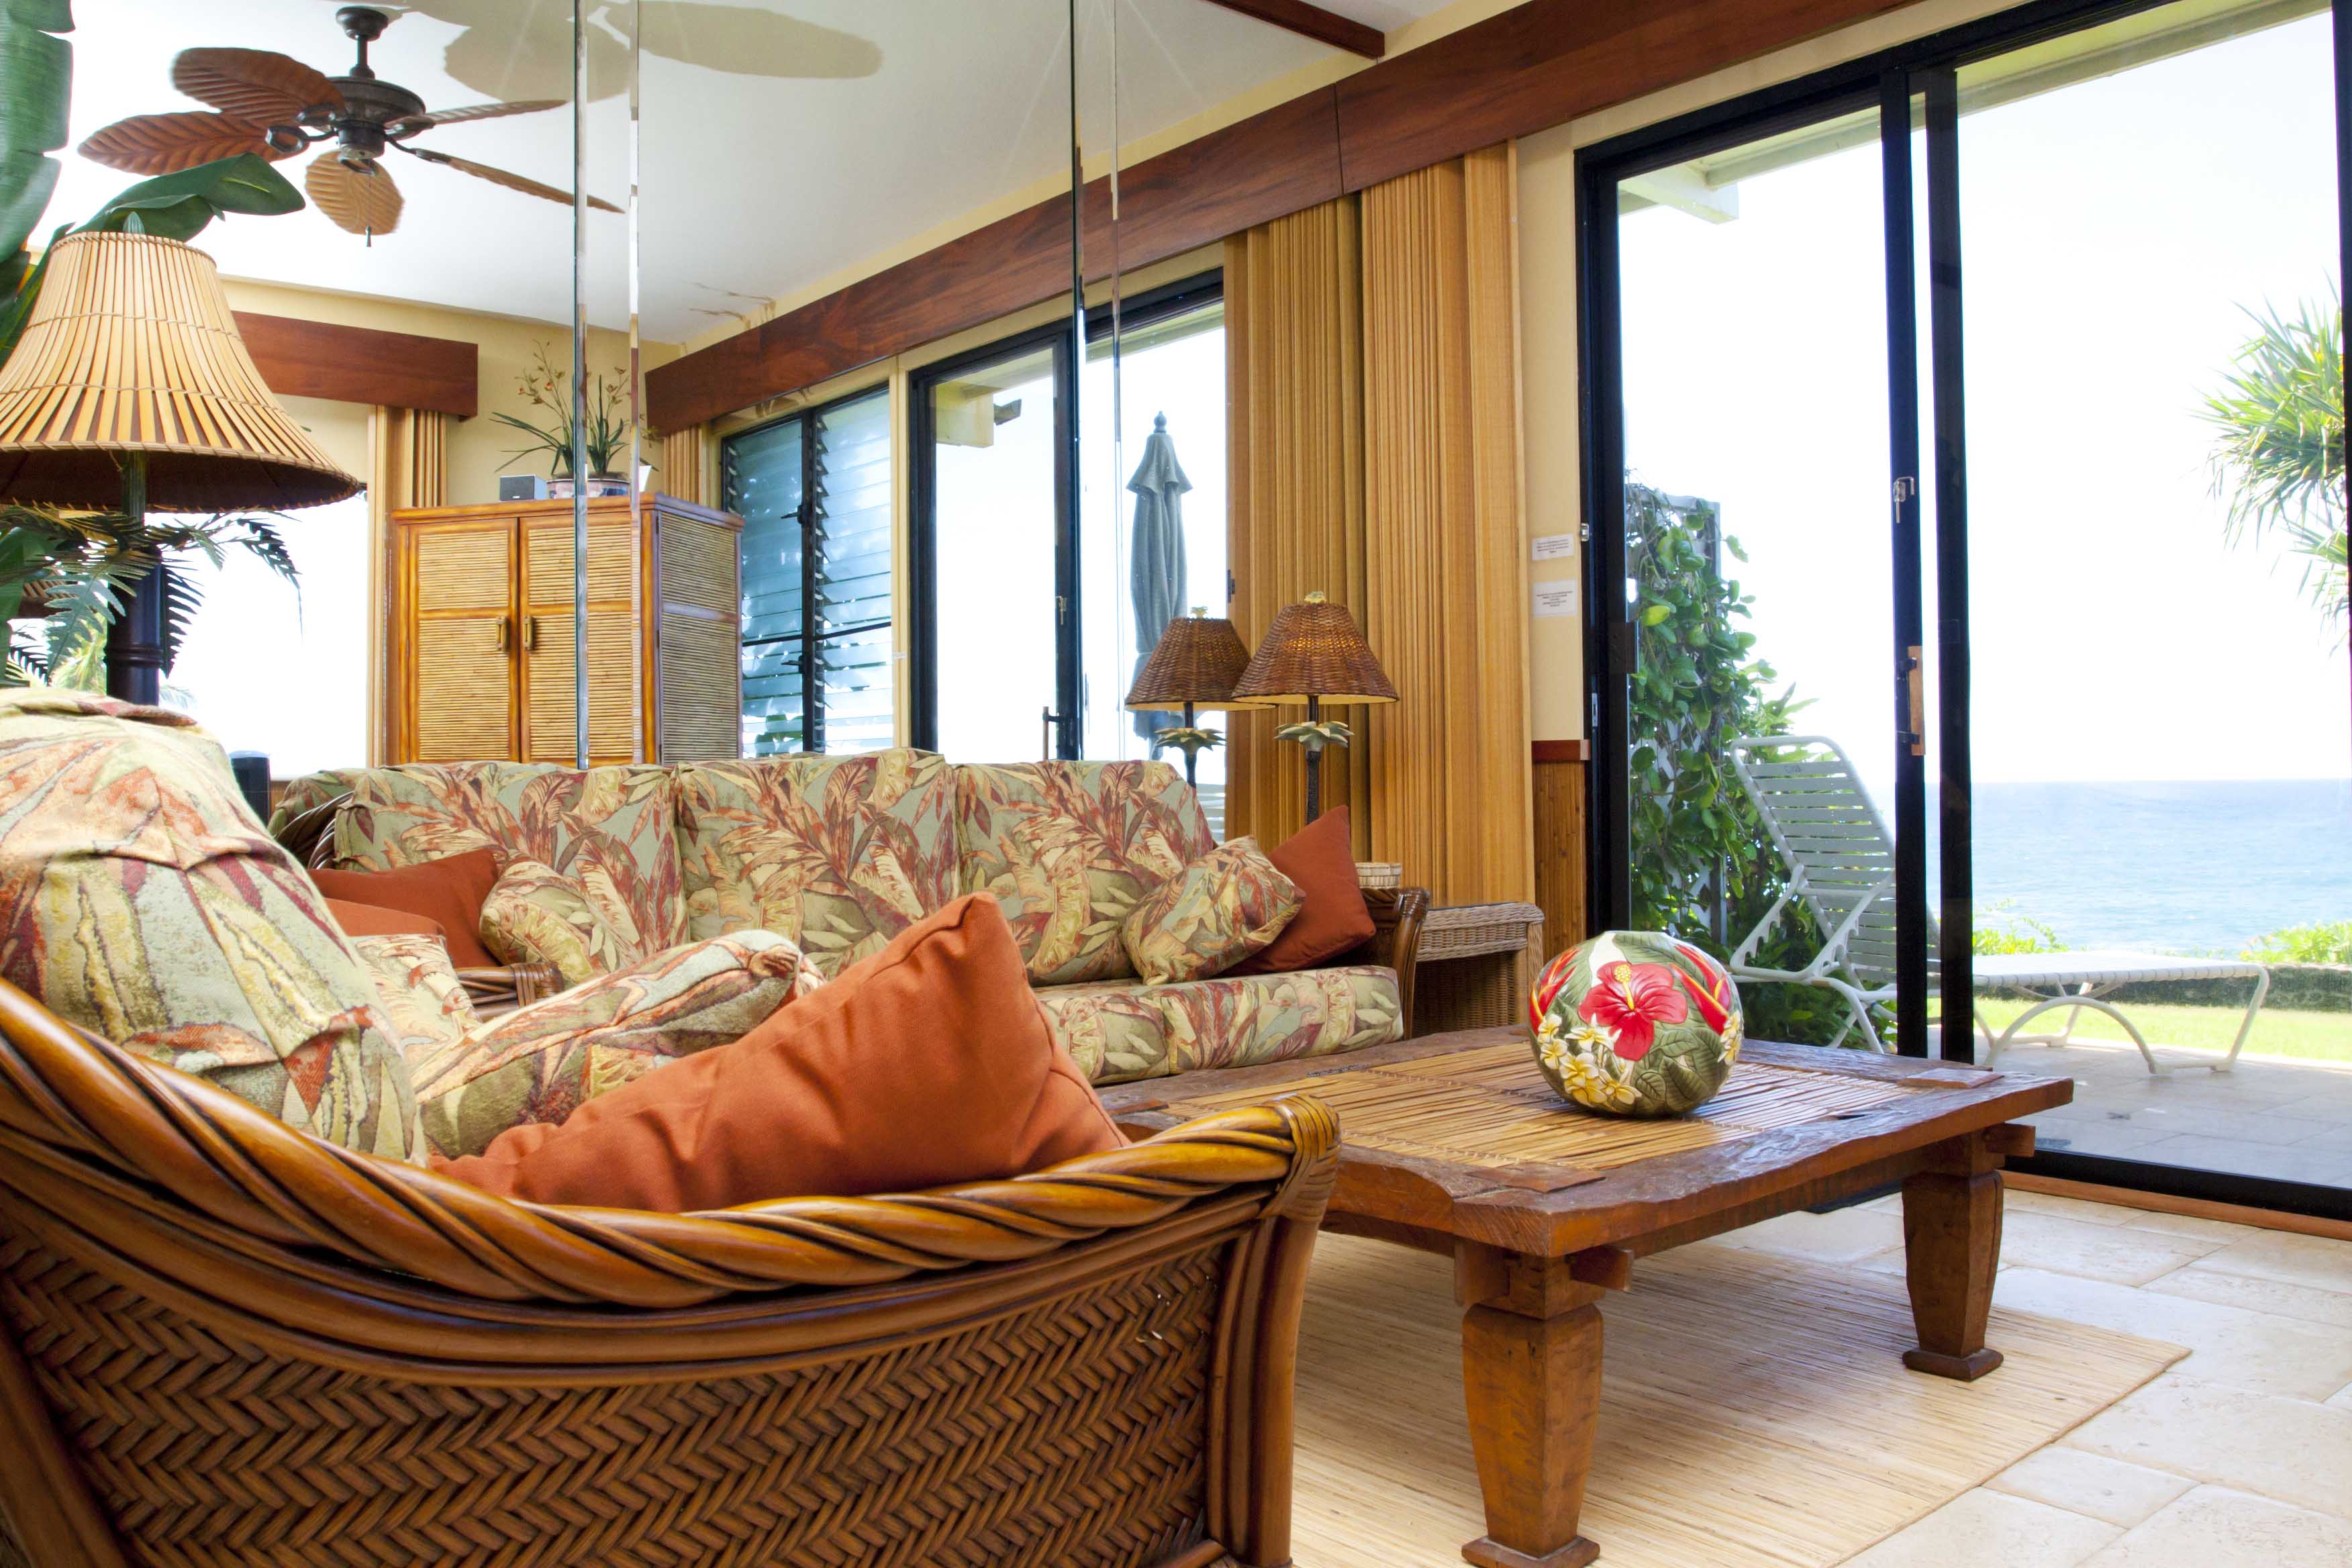 Beautifully furnished and appointed oceanfront living room that opens onto the grassy lawn.  Enjoy the birds playing and singing in the beautiful LauHala tree just outside the patio.